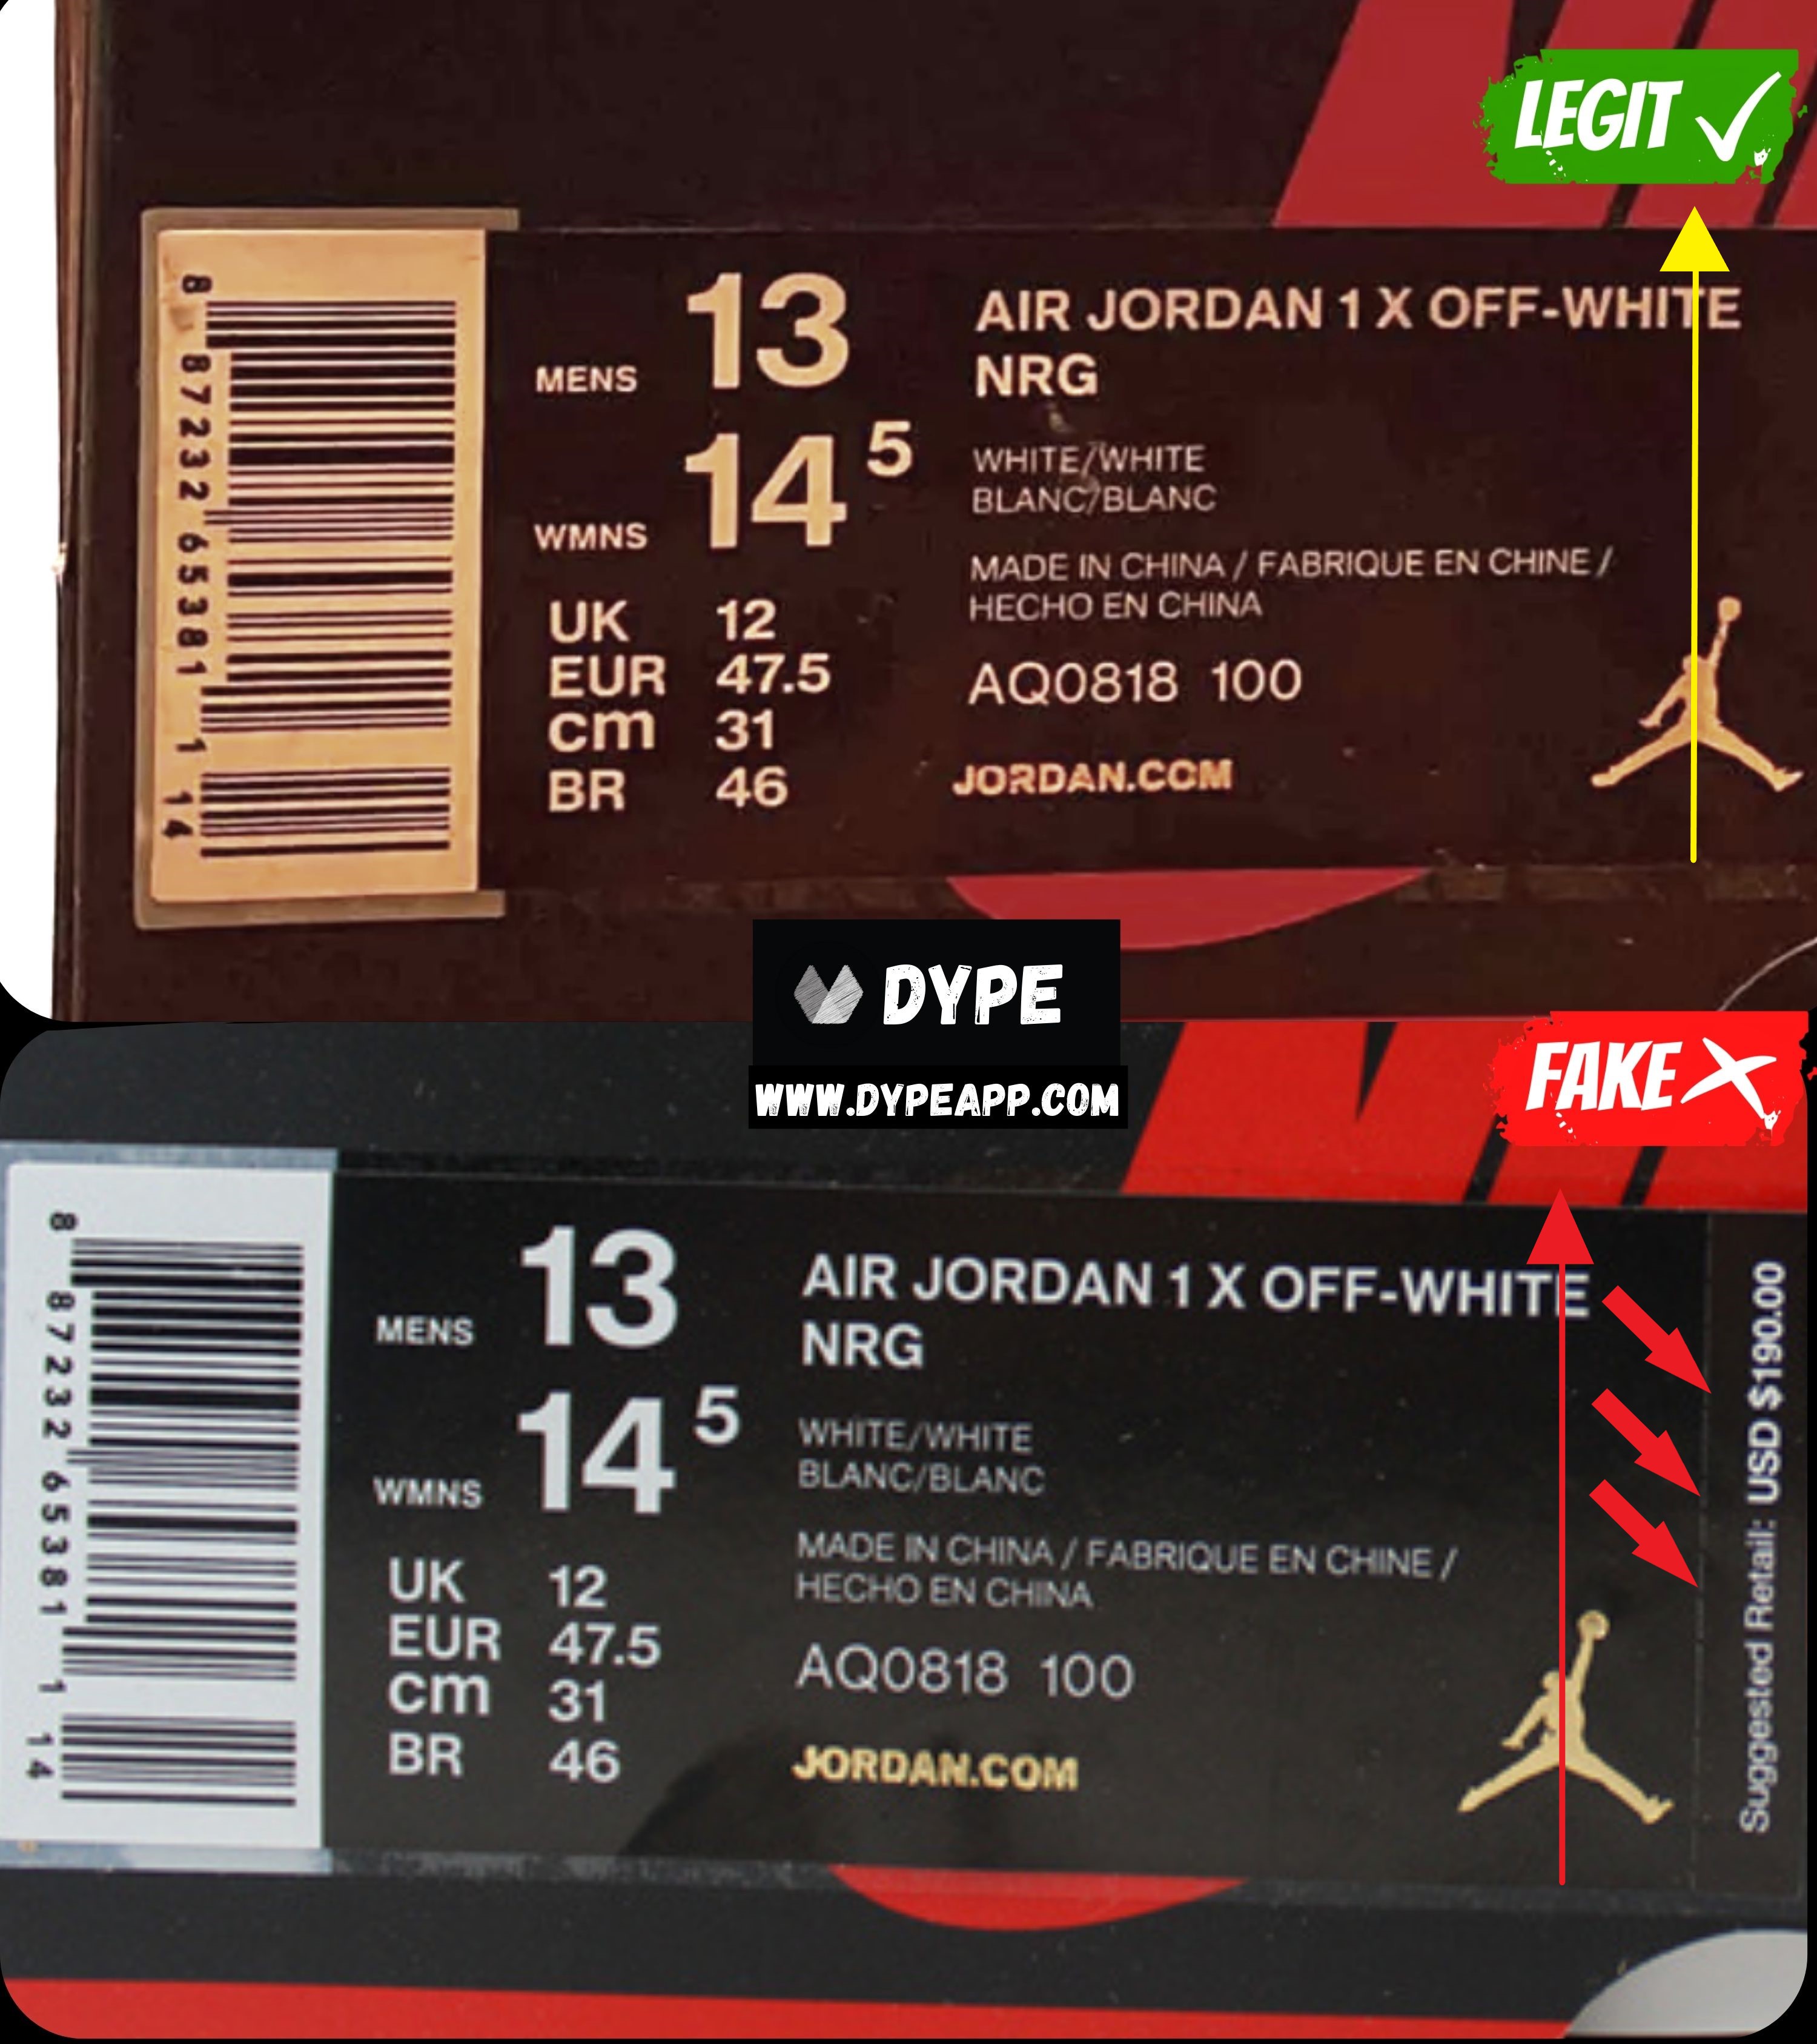 Fake OFF WHITE Air Jordan 1s for UNC Surface Online - WearTesters